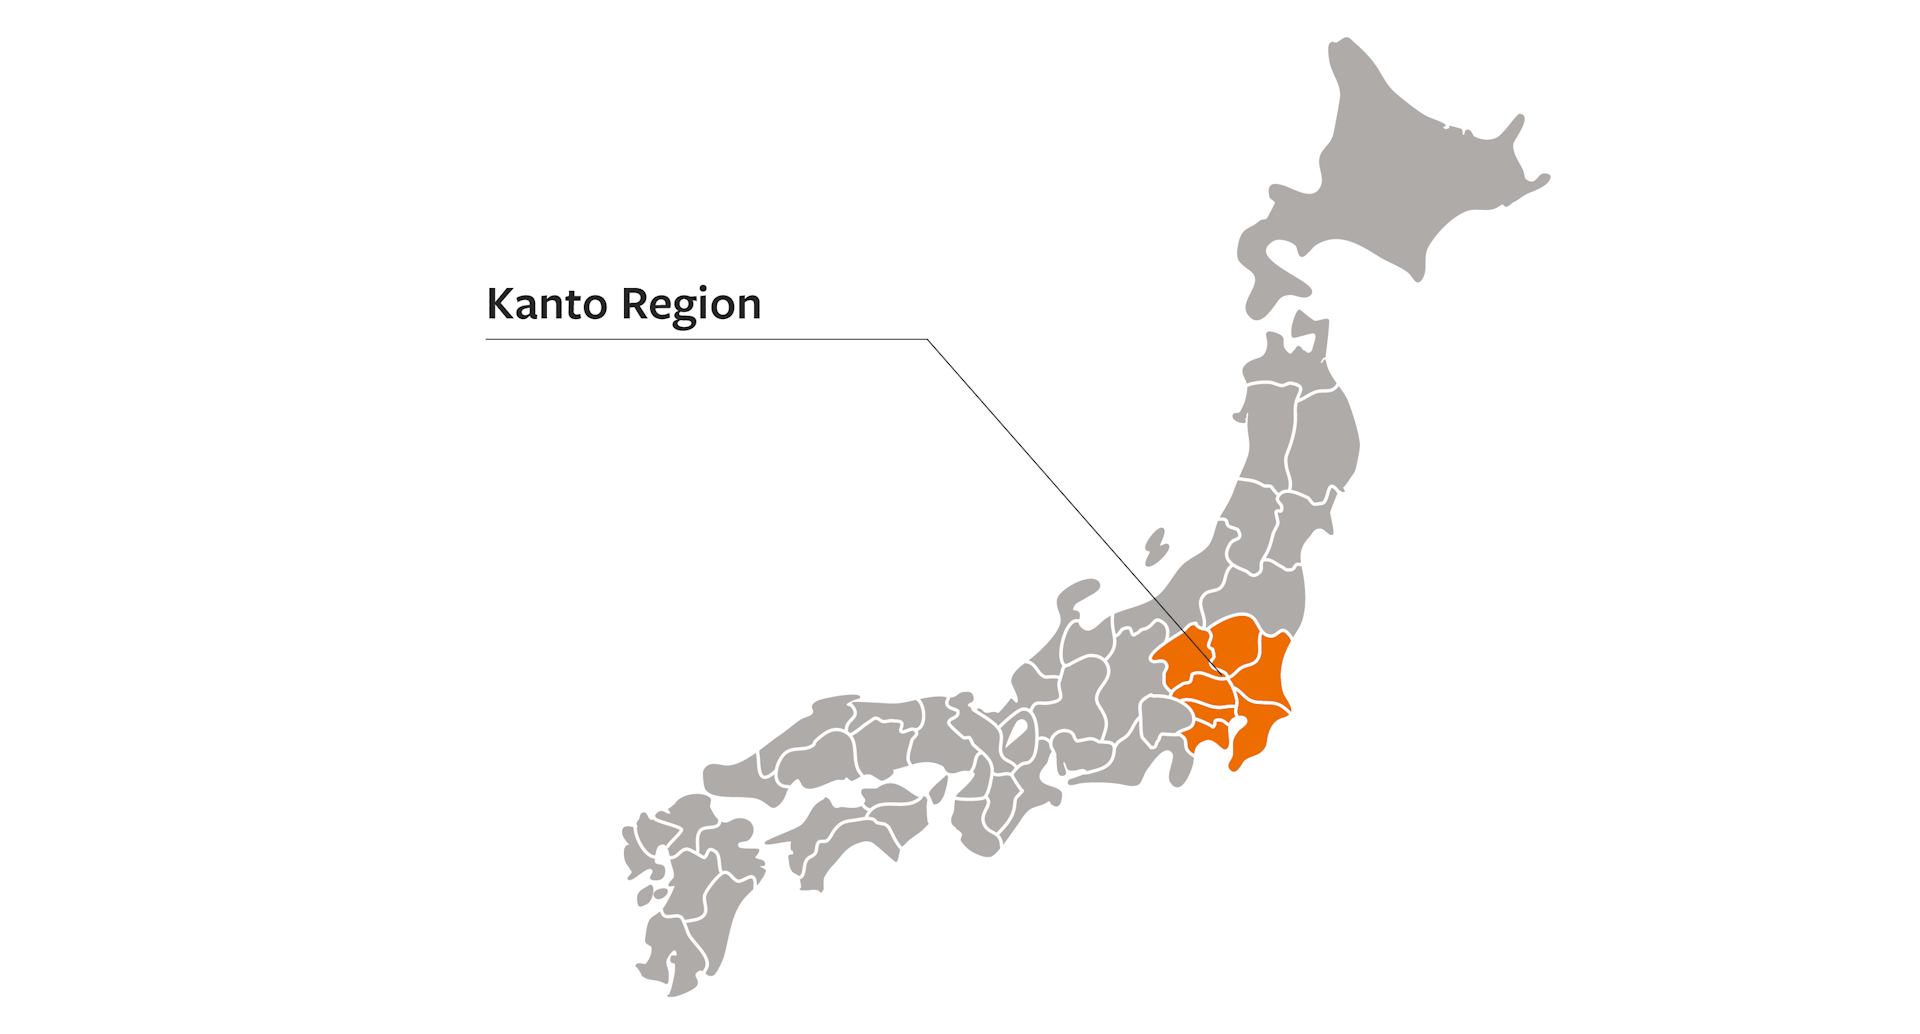 Kanto region on the map